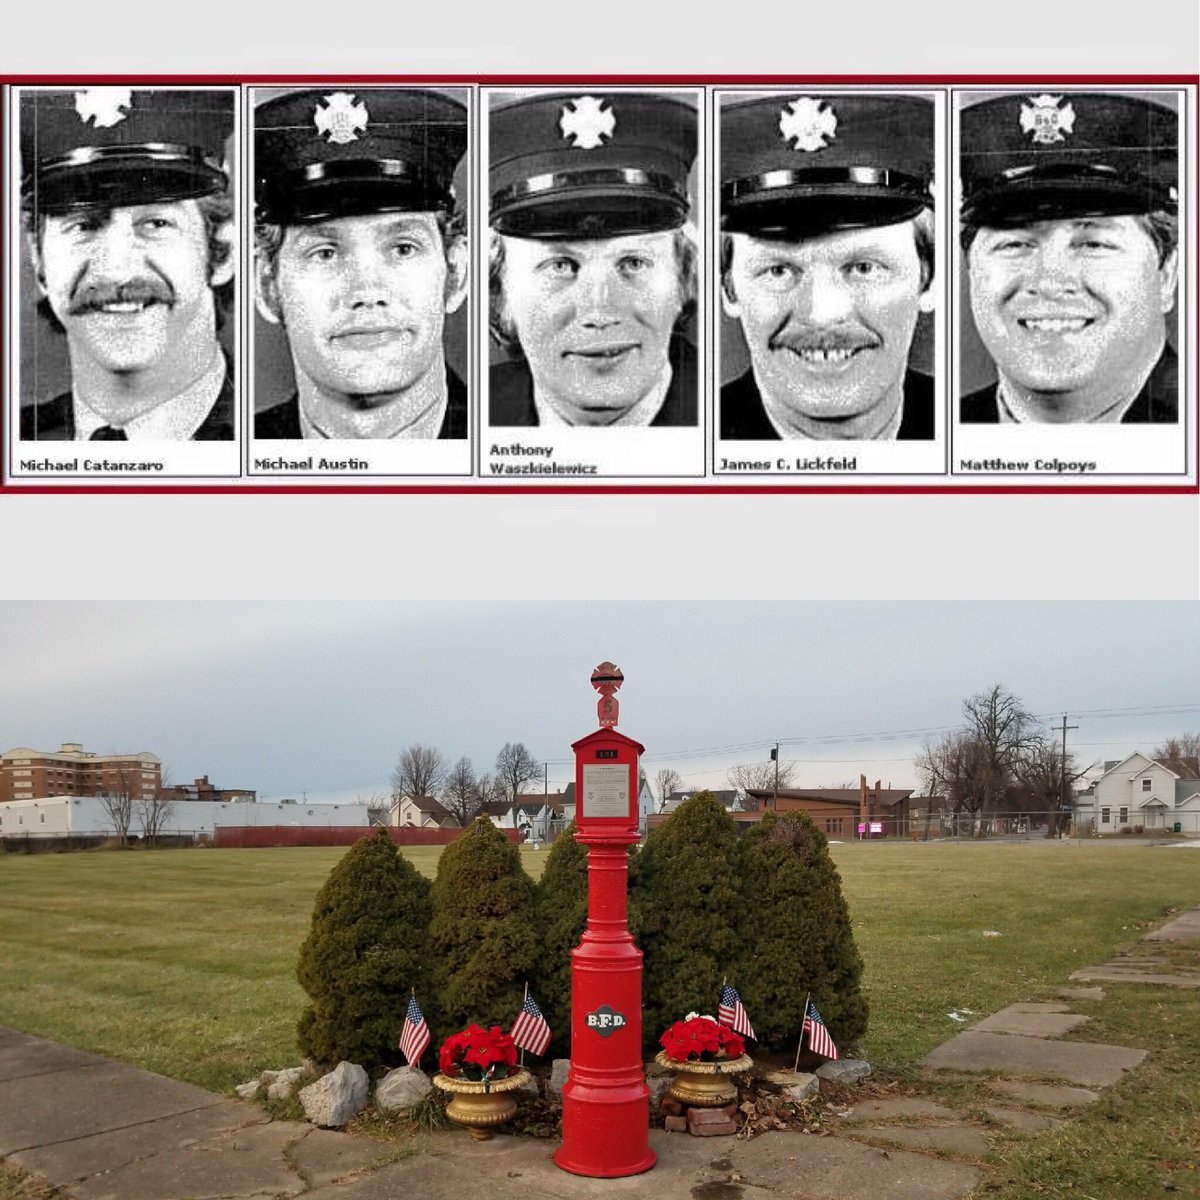 34 years ago today: A sad, tragic day in Buffalo history – propane explosion kills 7, including 5 firefighters